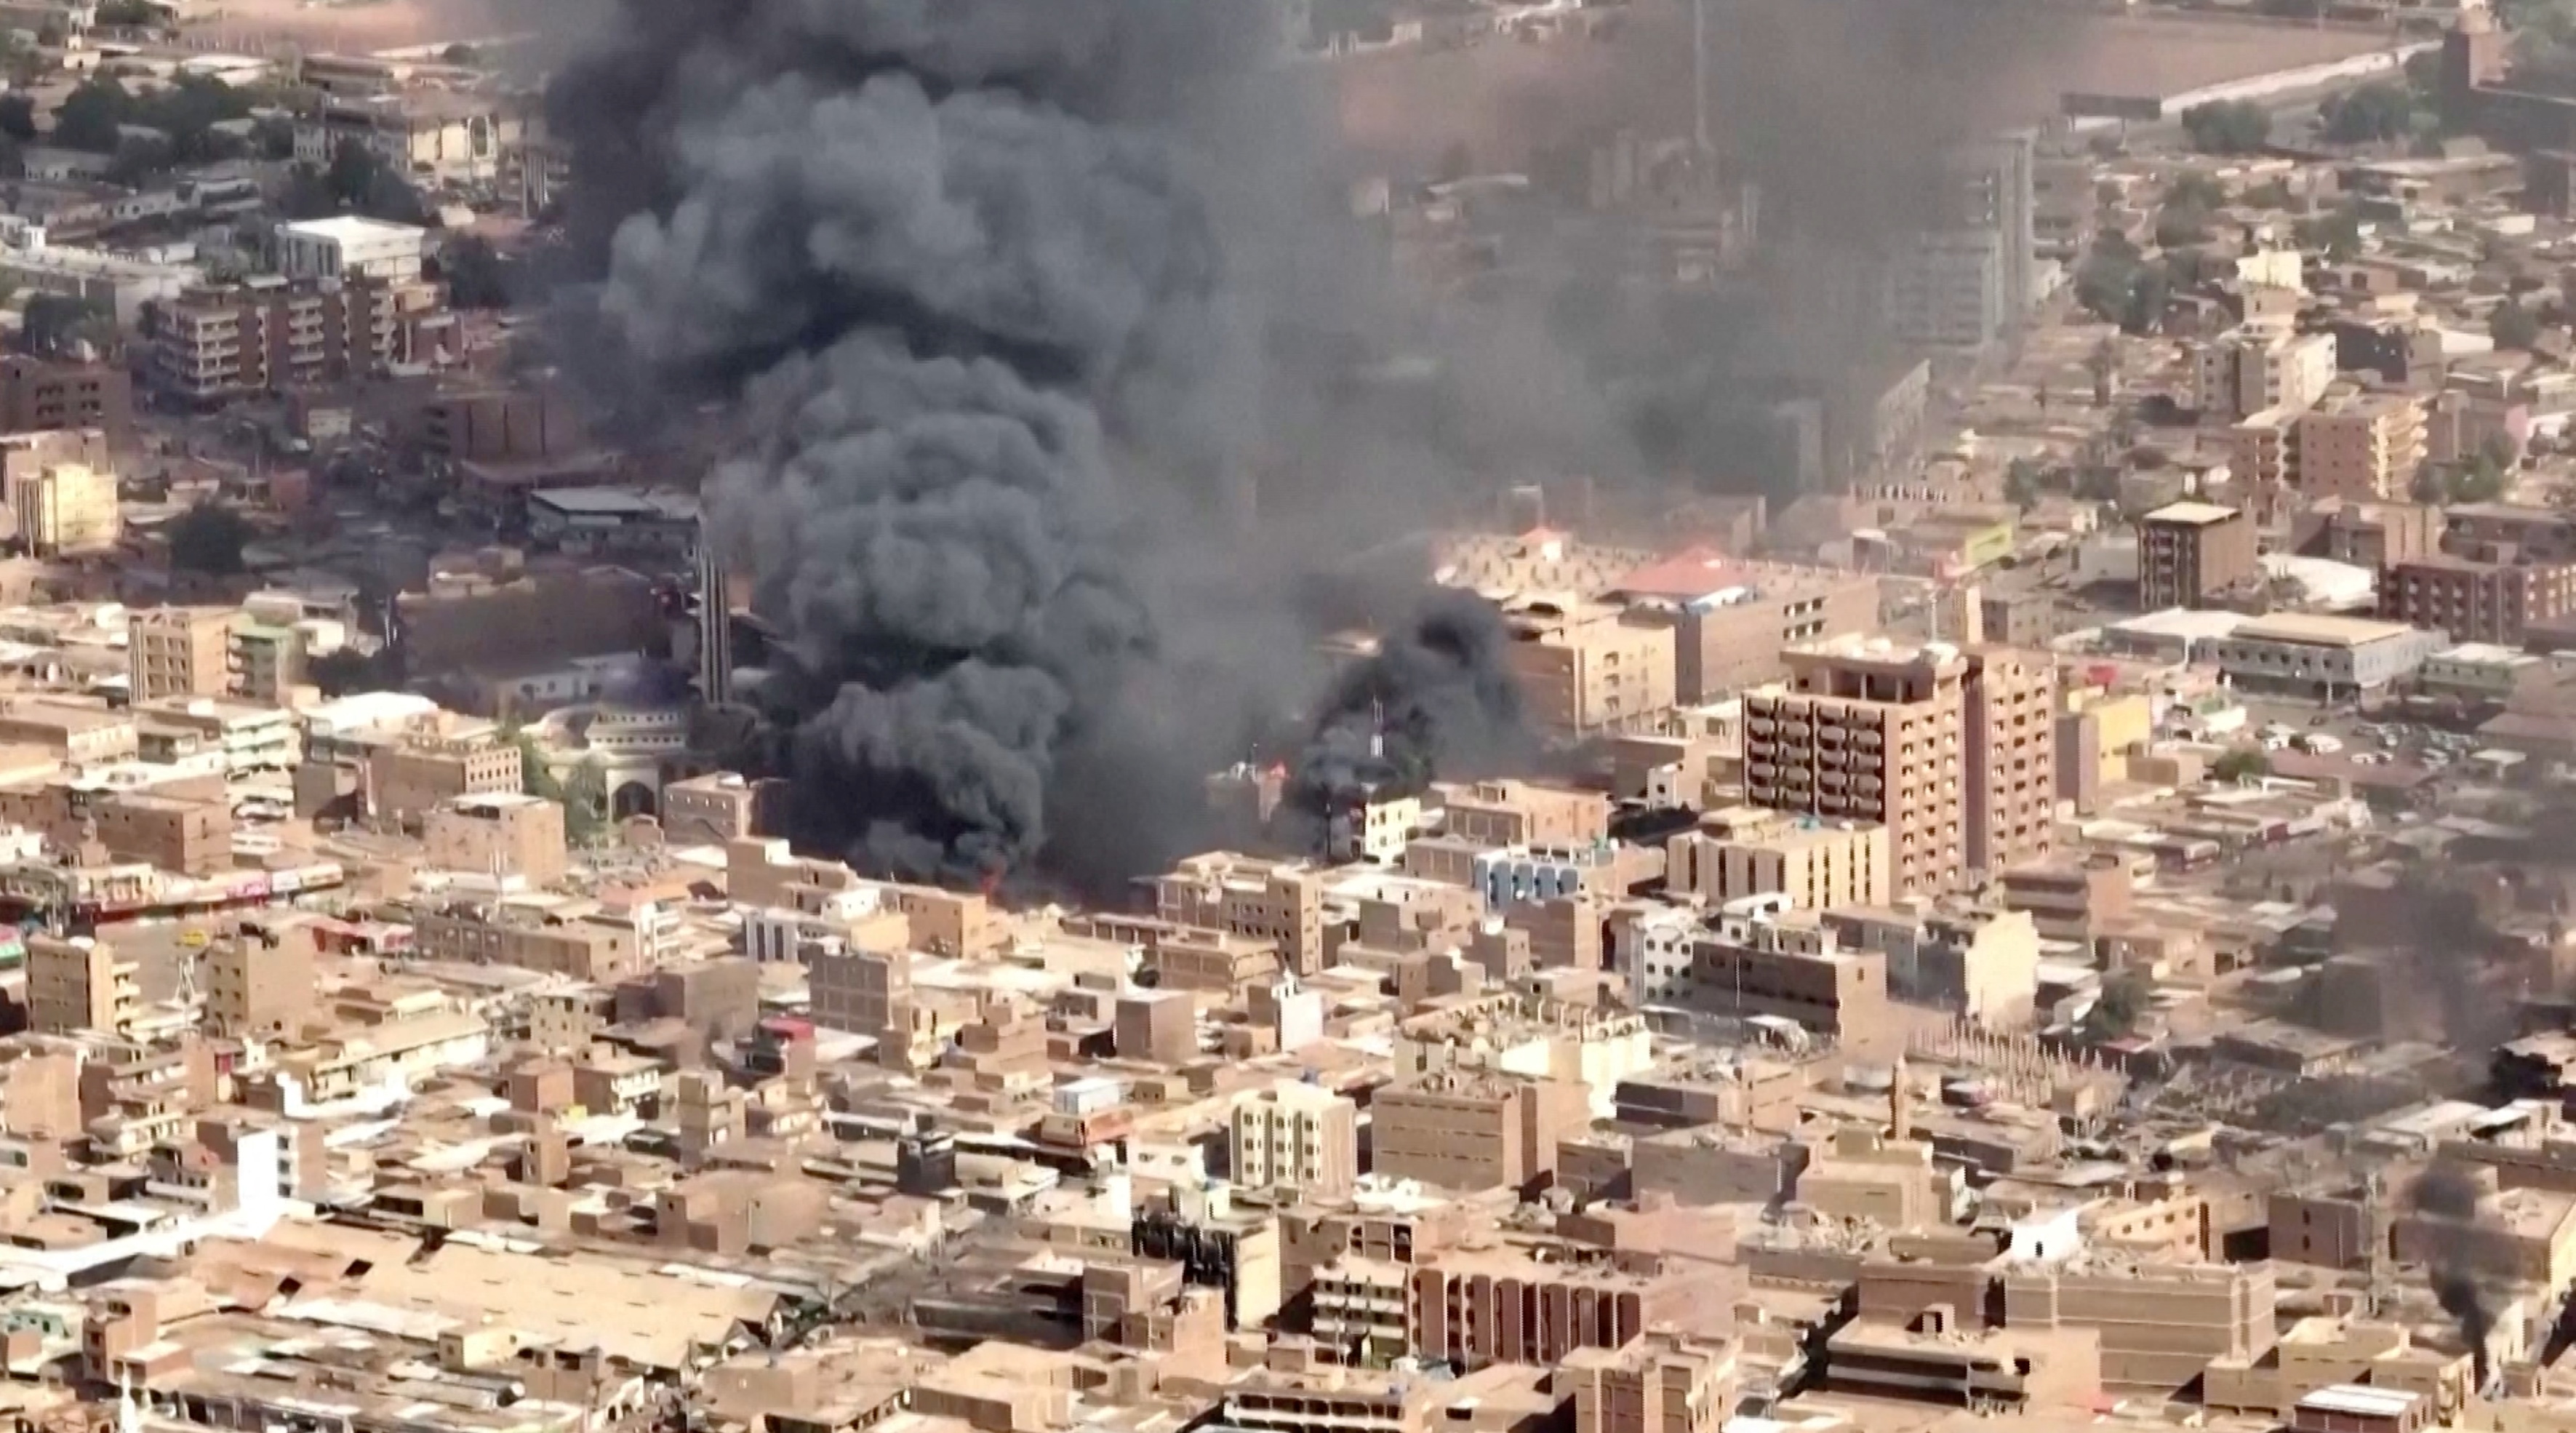 An aerial view of the black smoke and flames at a market in Omdurman, Khartoum North, Sudan